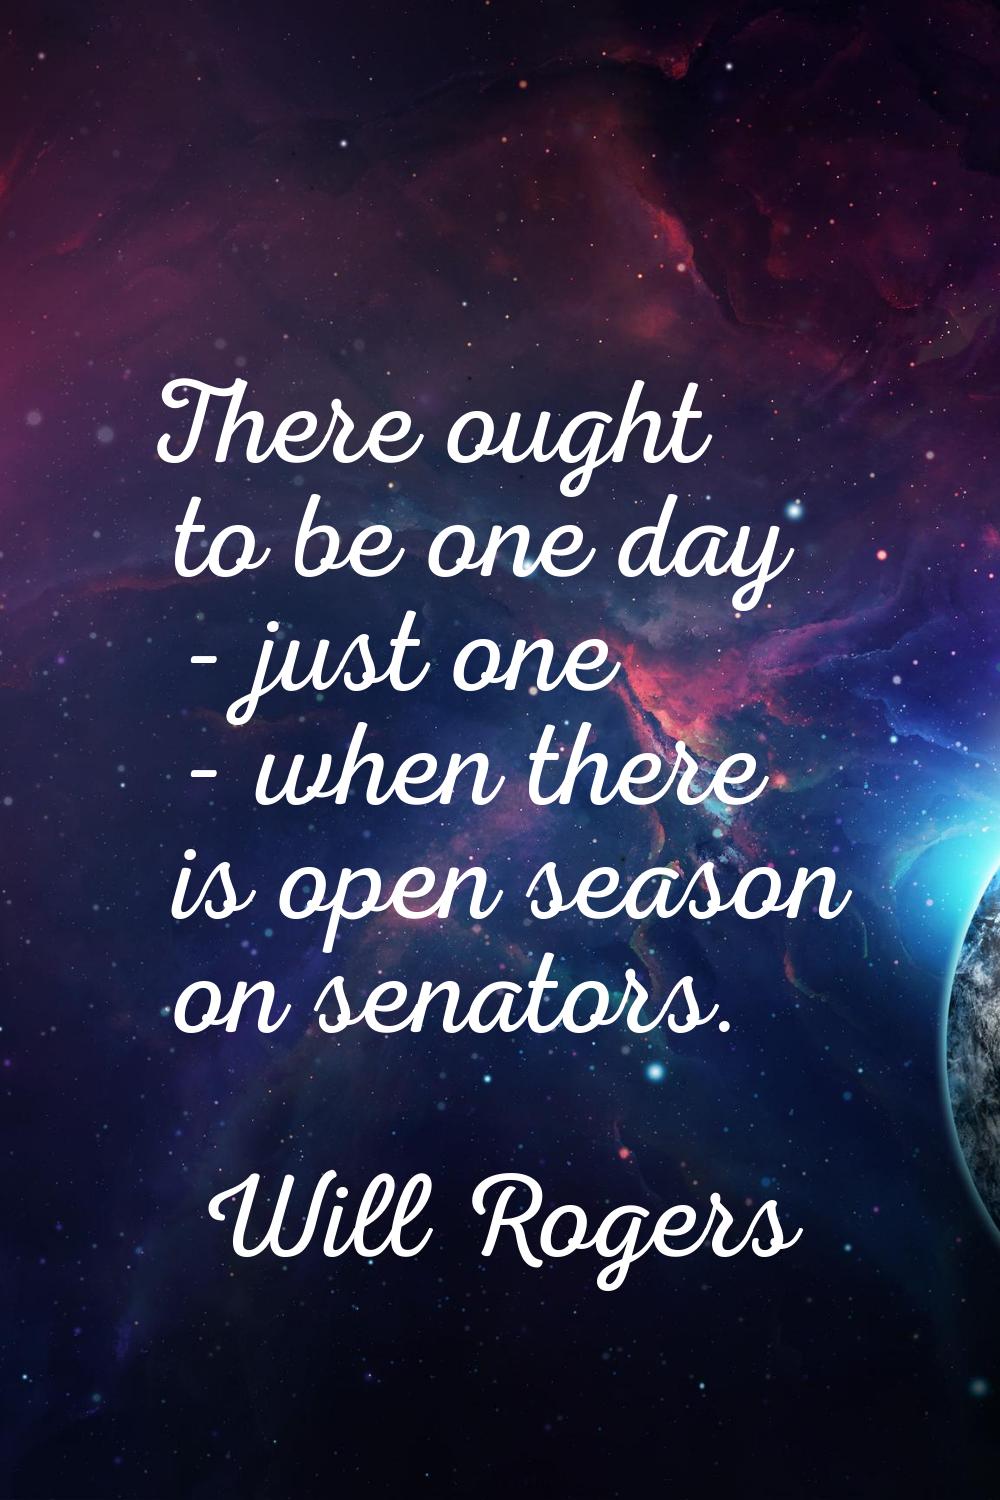 There ought to be one day - just one - when there is open season on senators.